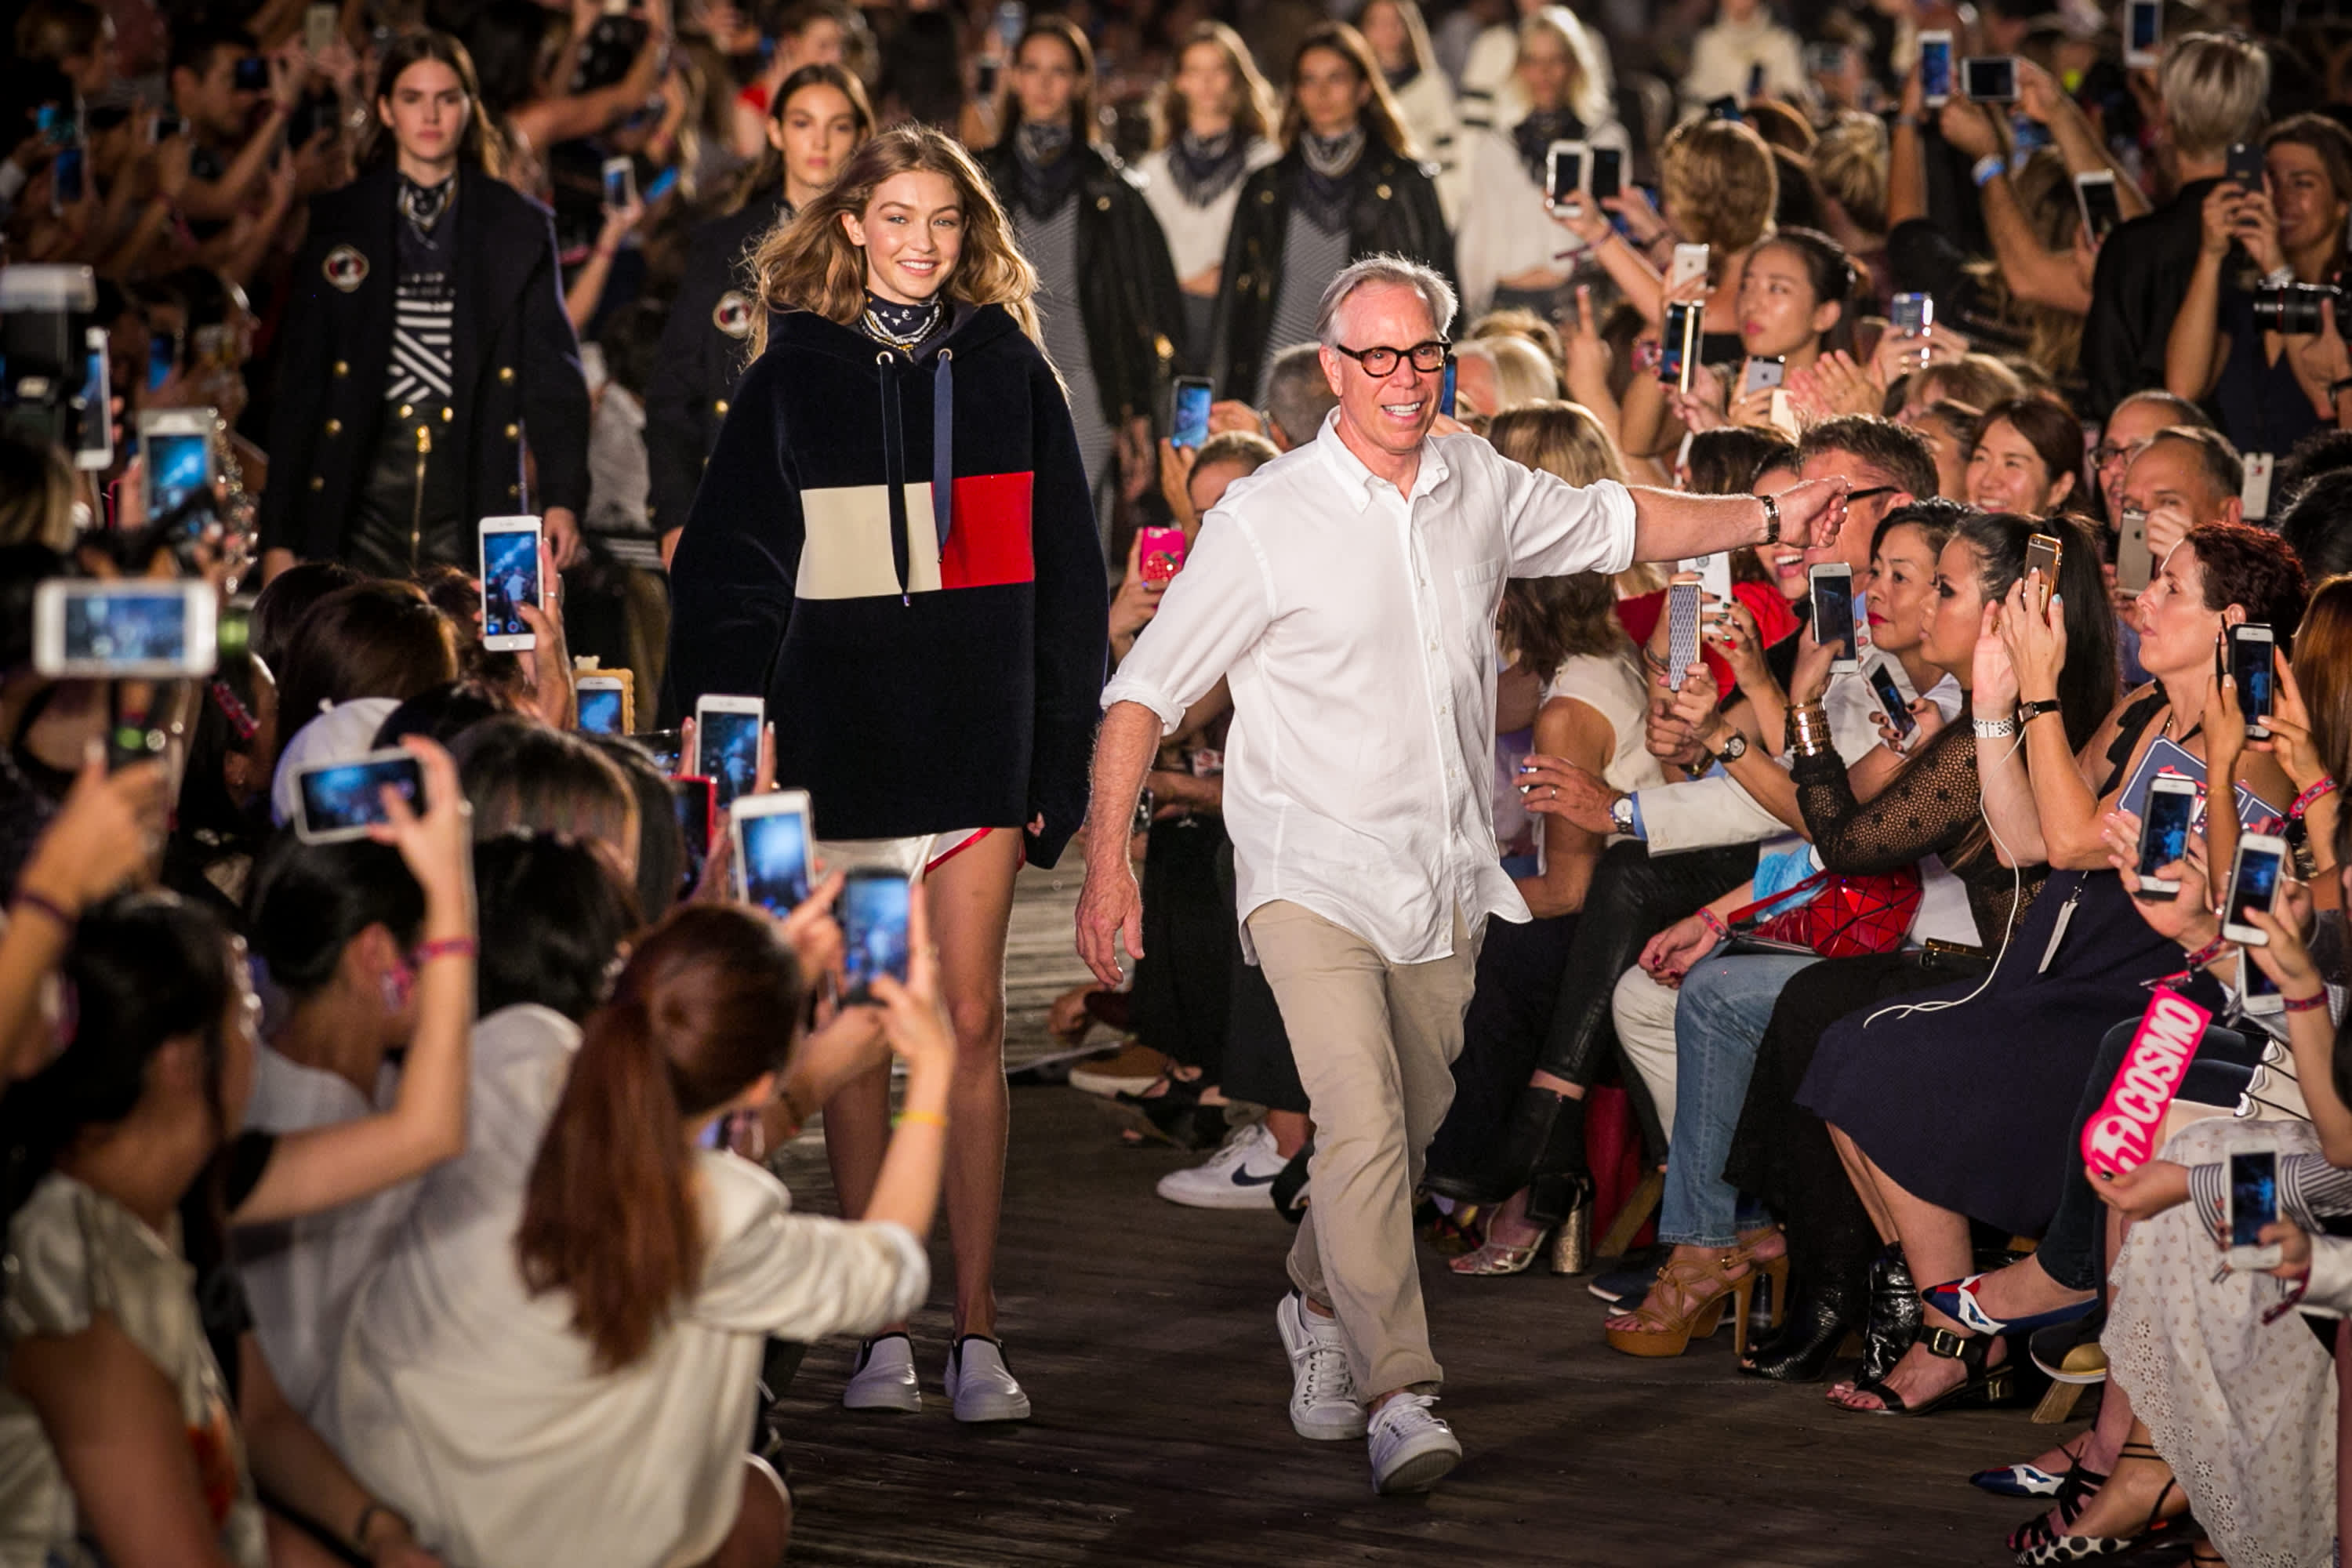 In pictures: Tommy Hilfiger launches Tommy sport, its first